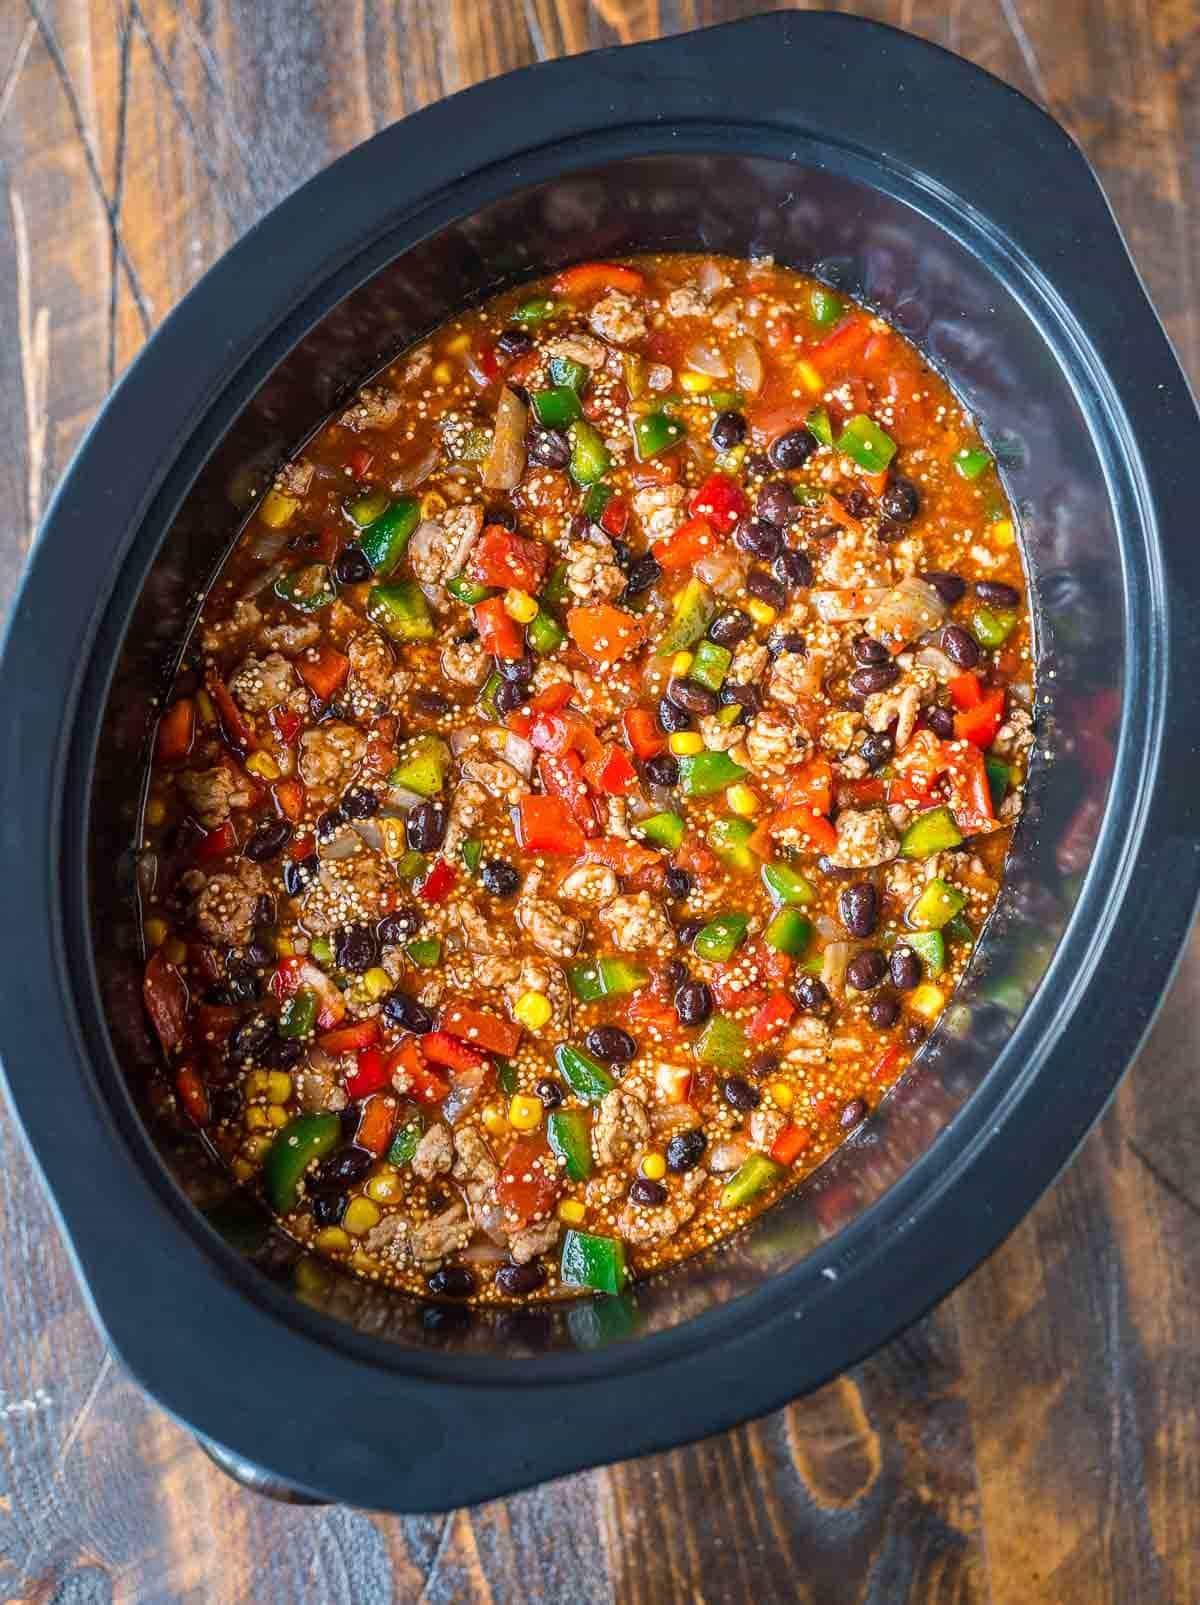 Crock Pot Mexican Casserole Recipe | Well Plated by Erin